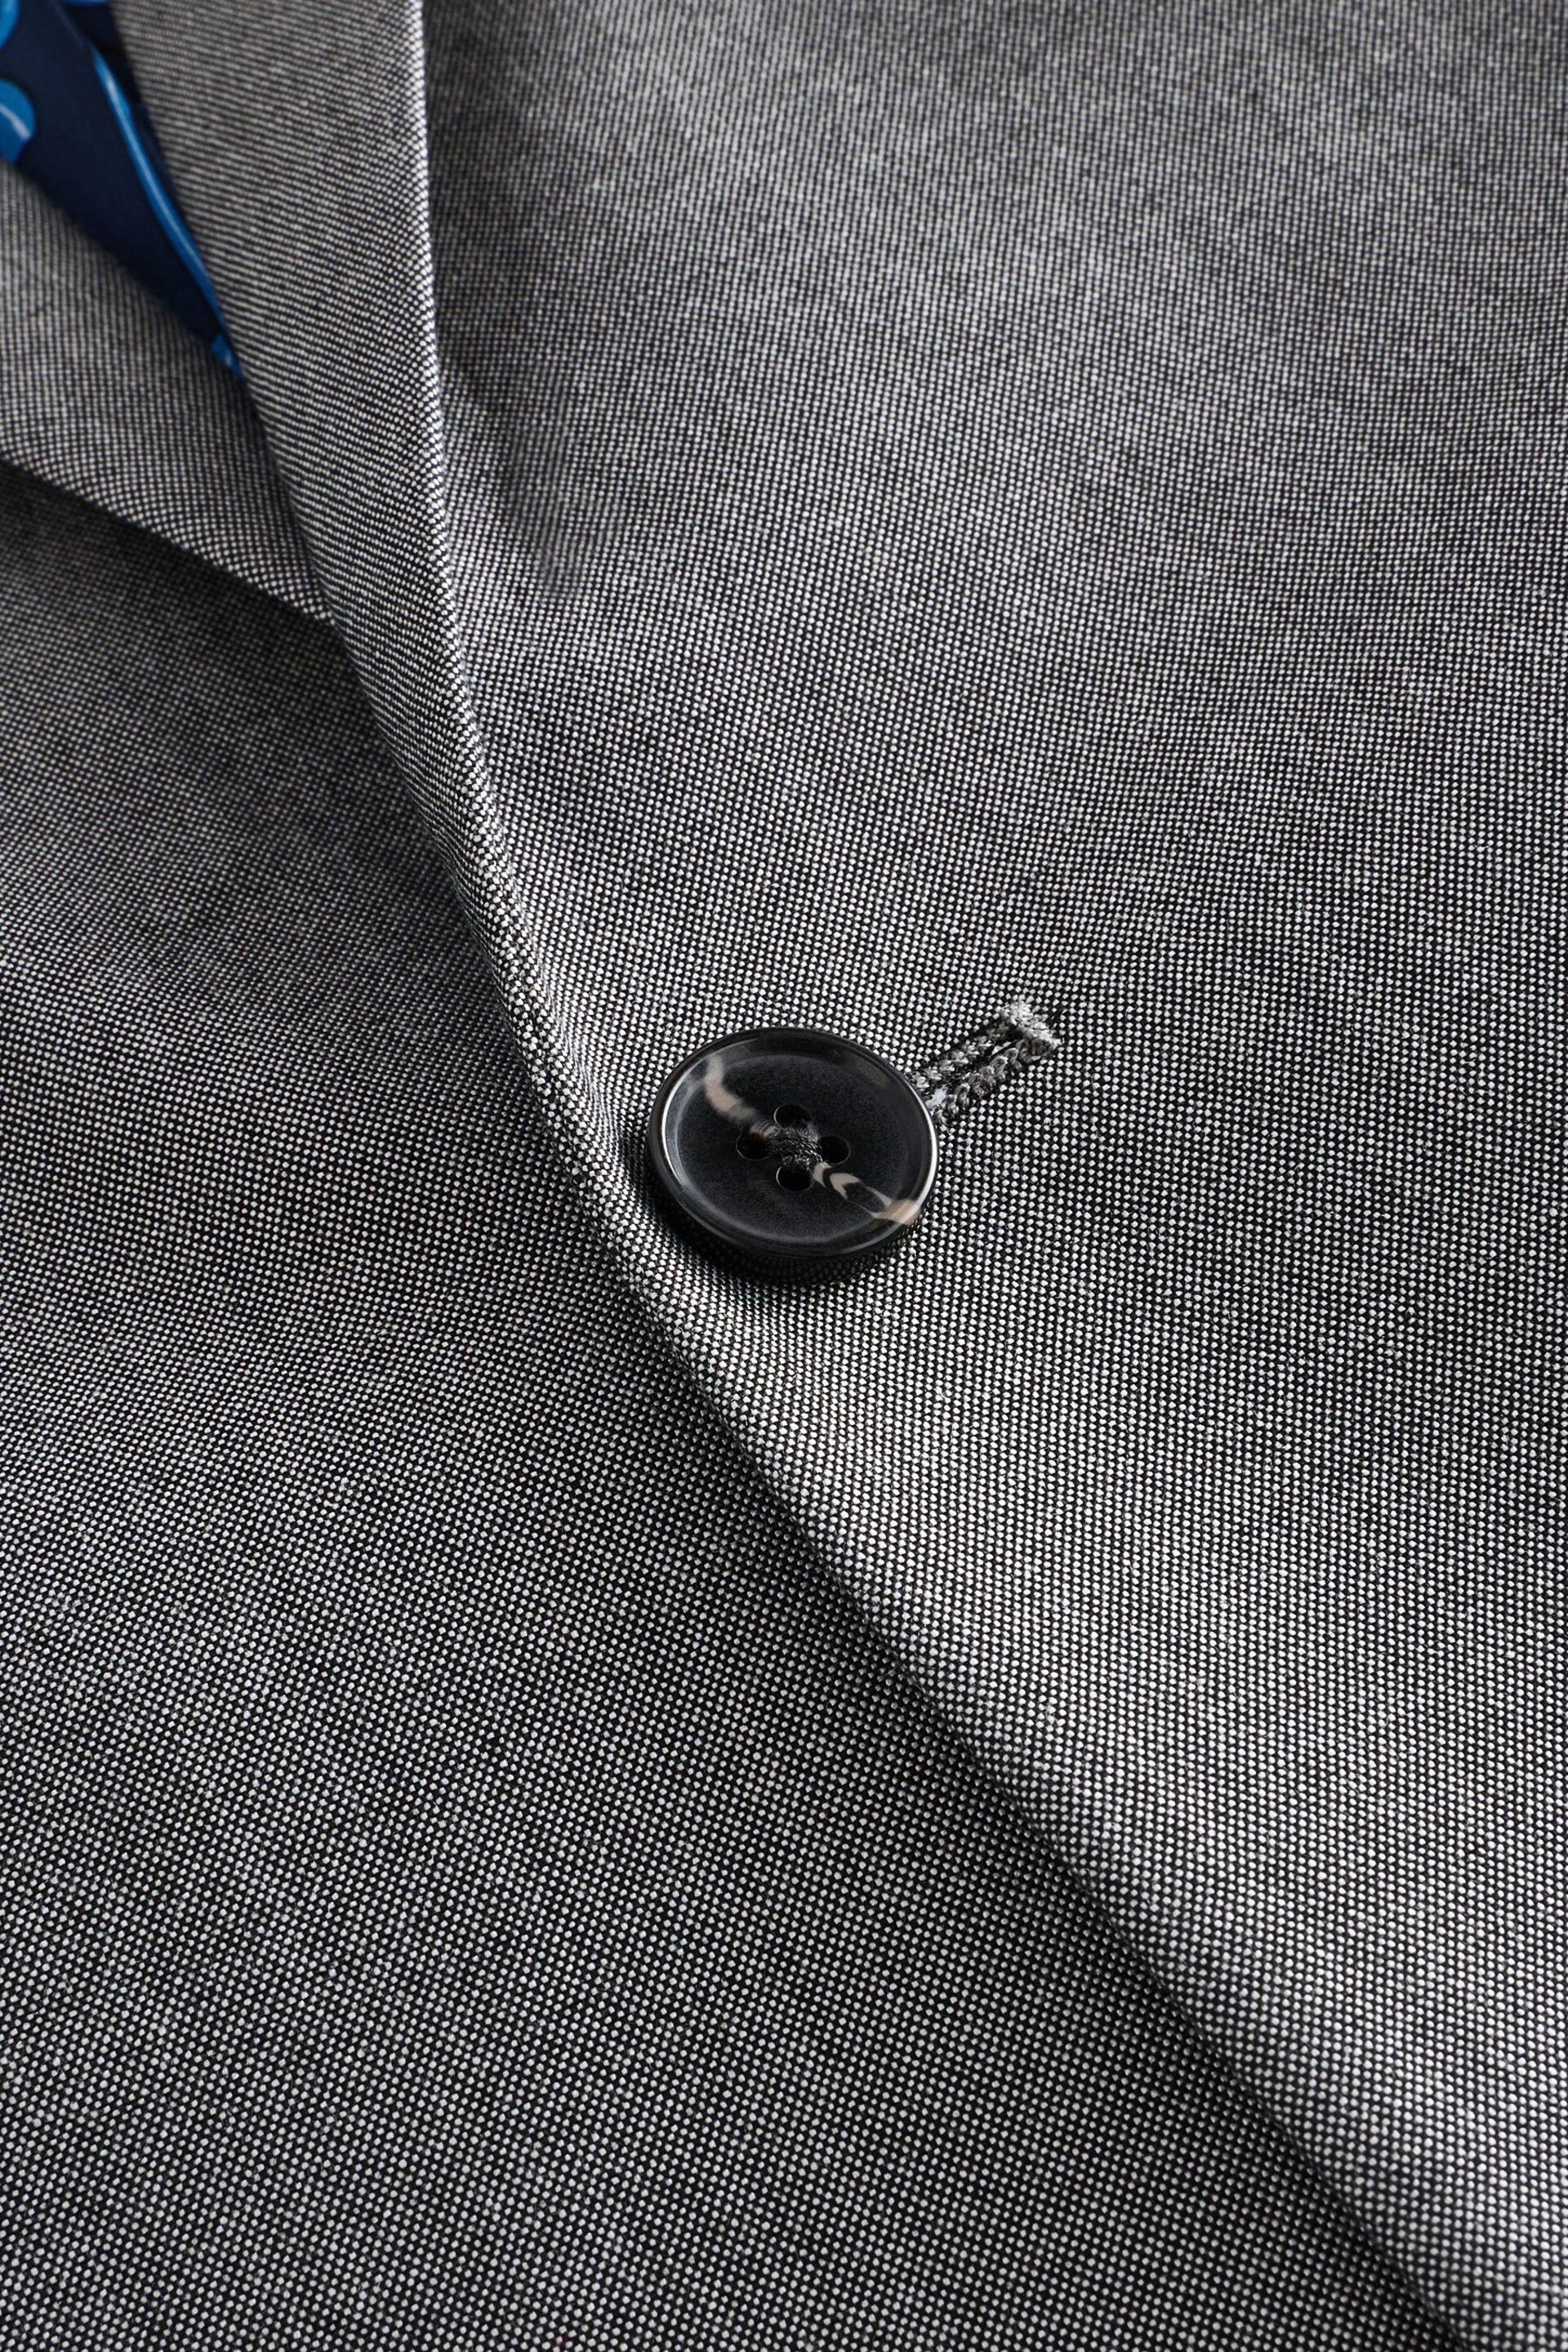 Light Grey Slim Fit Two Button Suit Jacket - Image 6 of 9